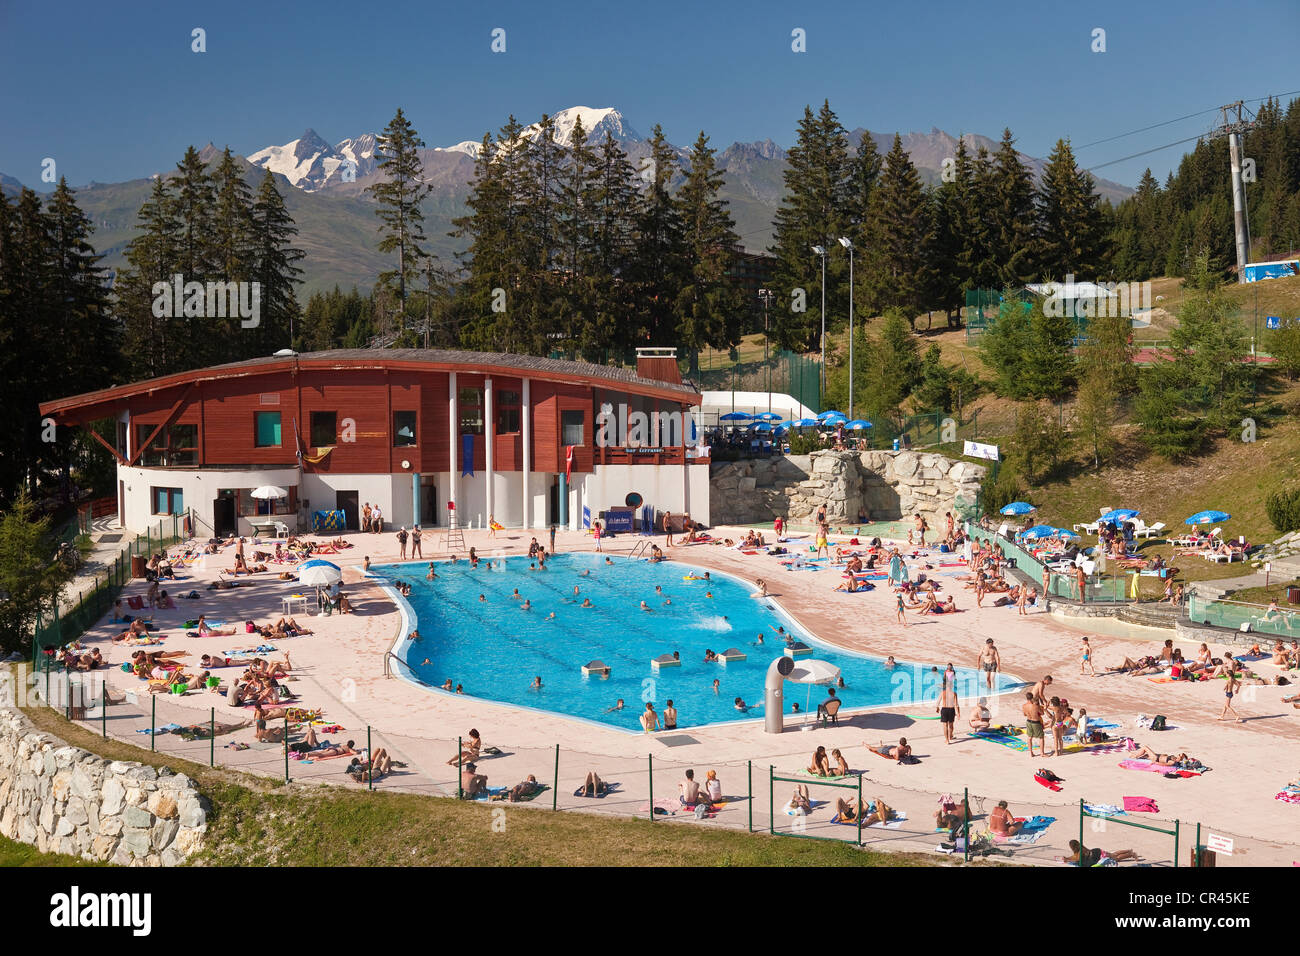 France, Savoie, Les Arcs 1800, the pool and views of Mont Blanc (4810m) Stock Photo